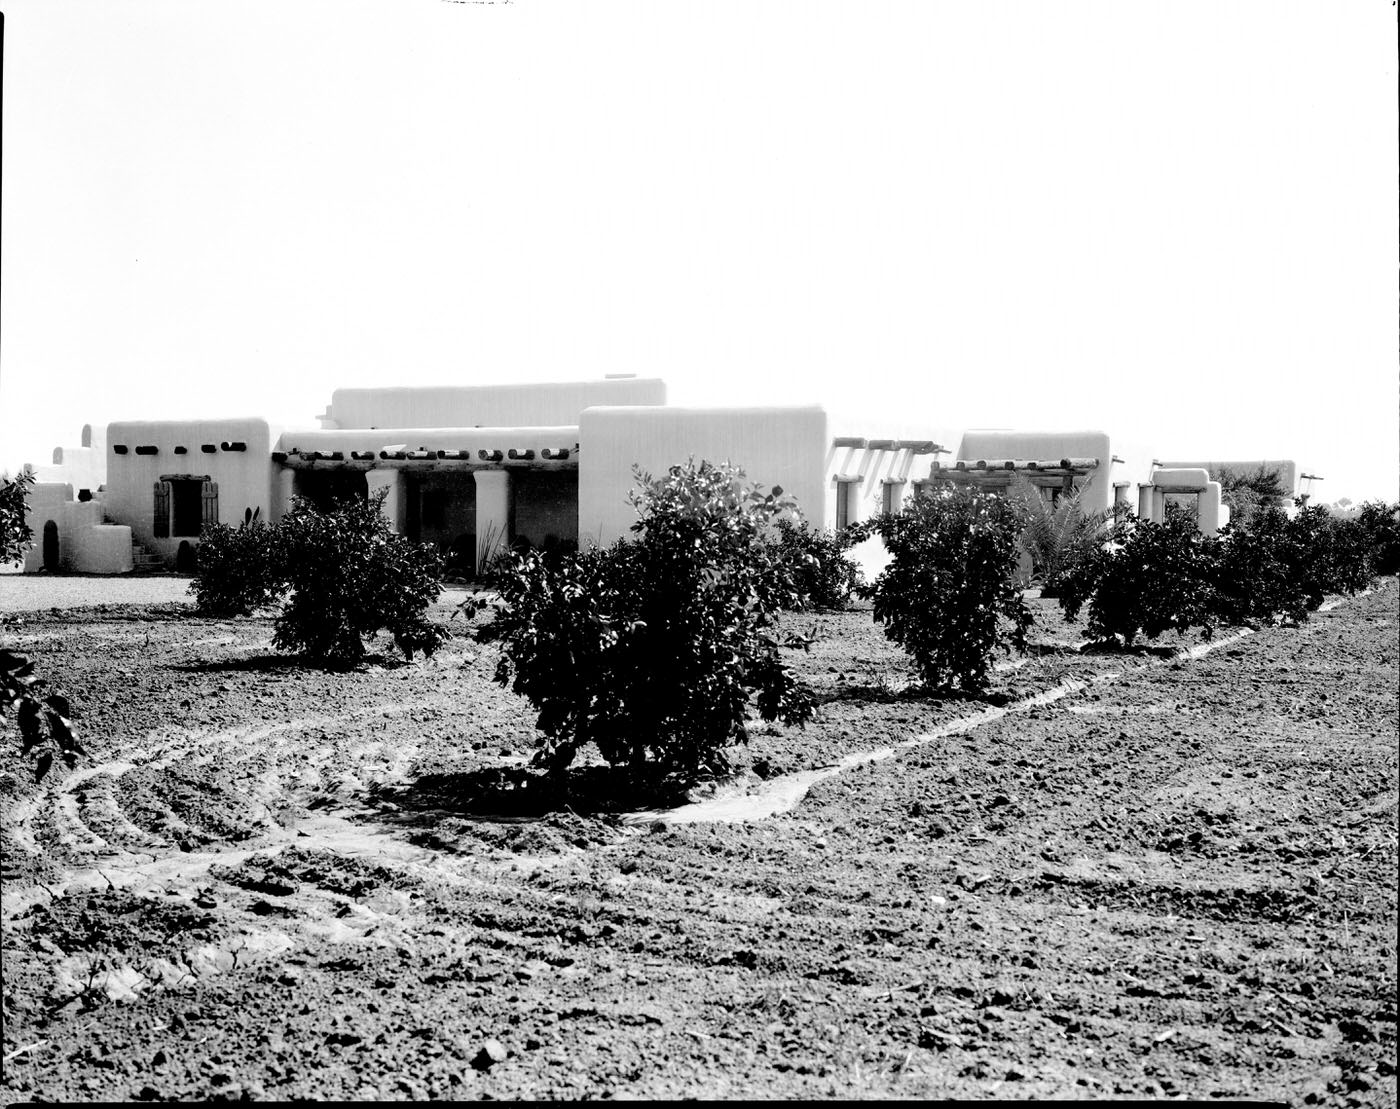 Ranch House on Citrus Ranch. This ranch was located on Northern Ave. in Phoenix, 1930s